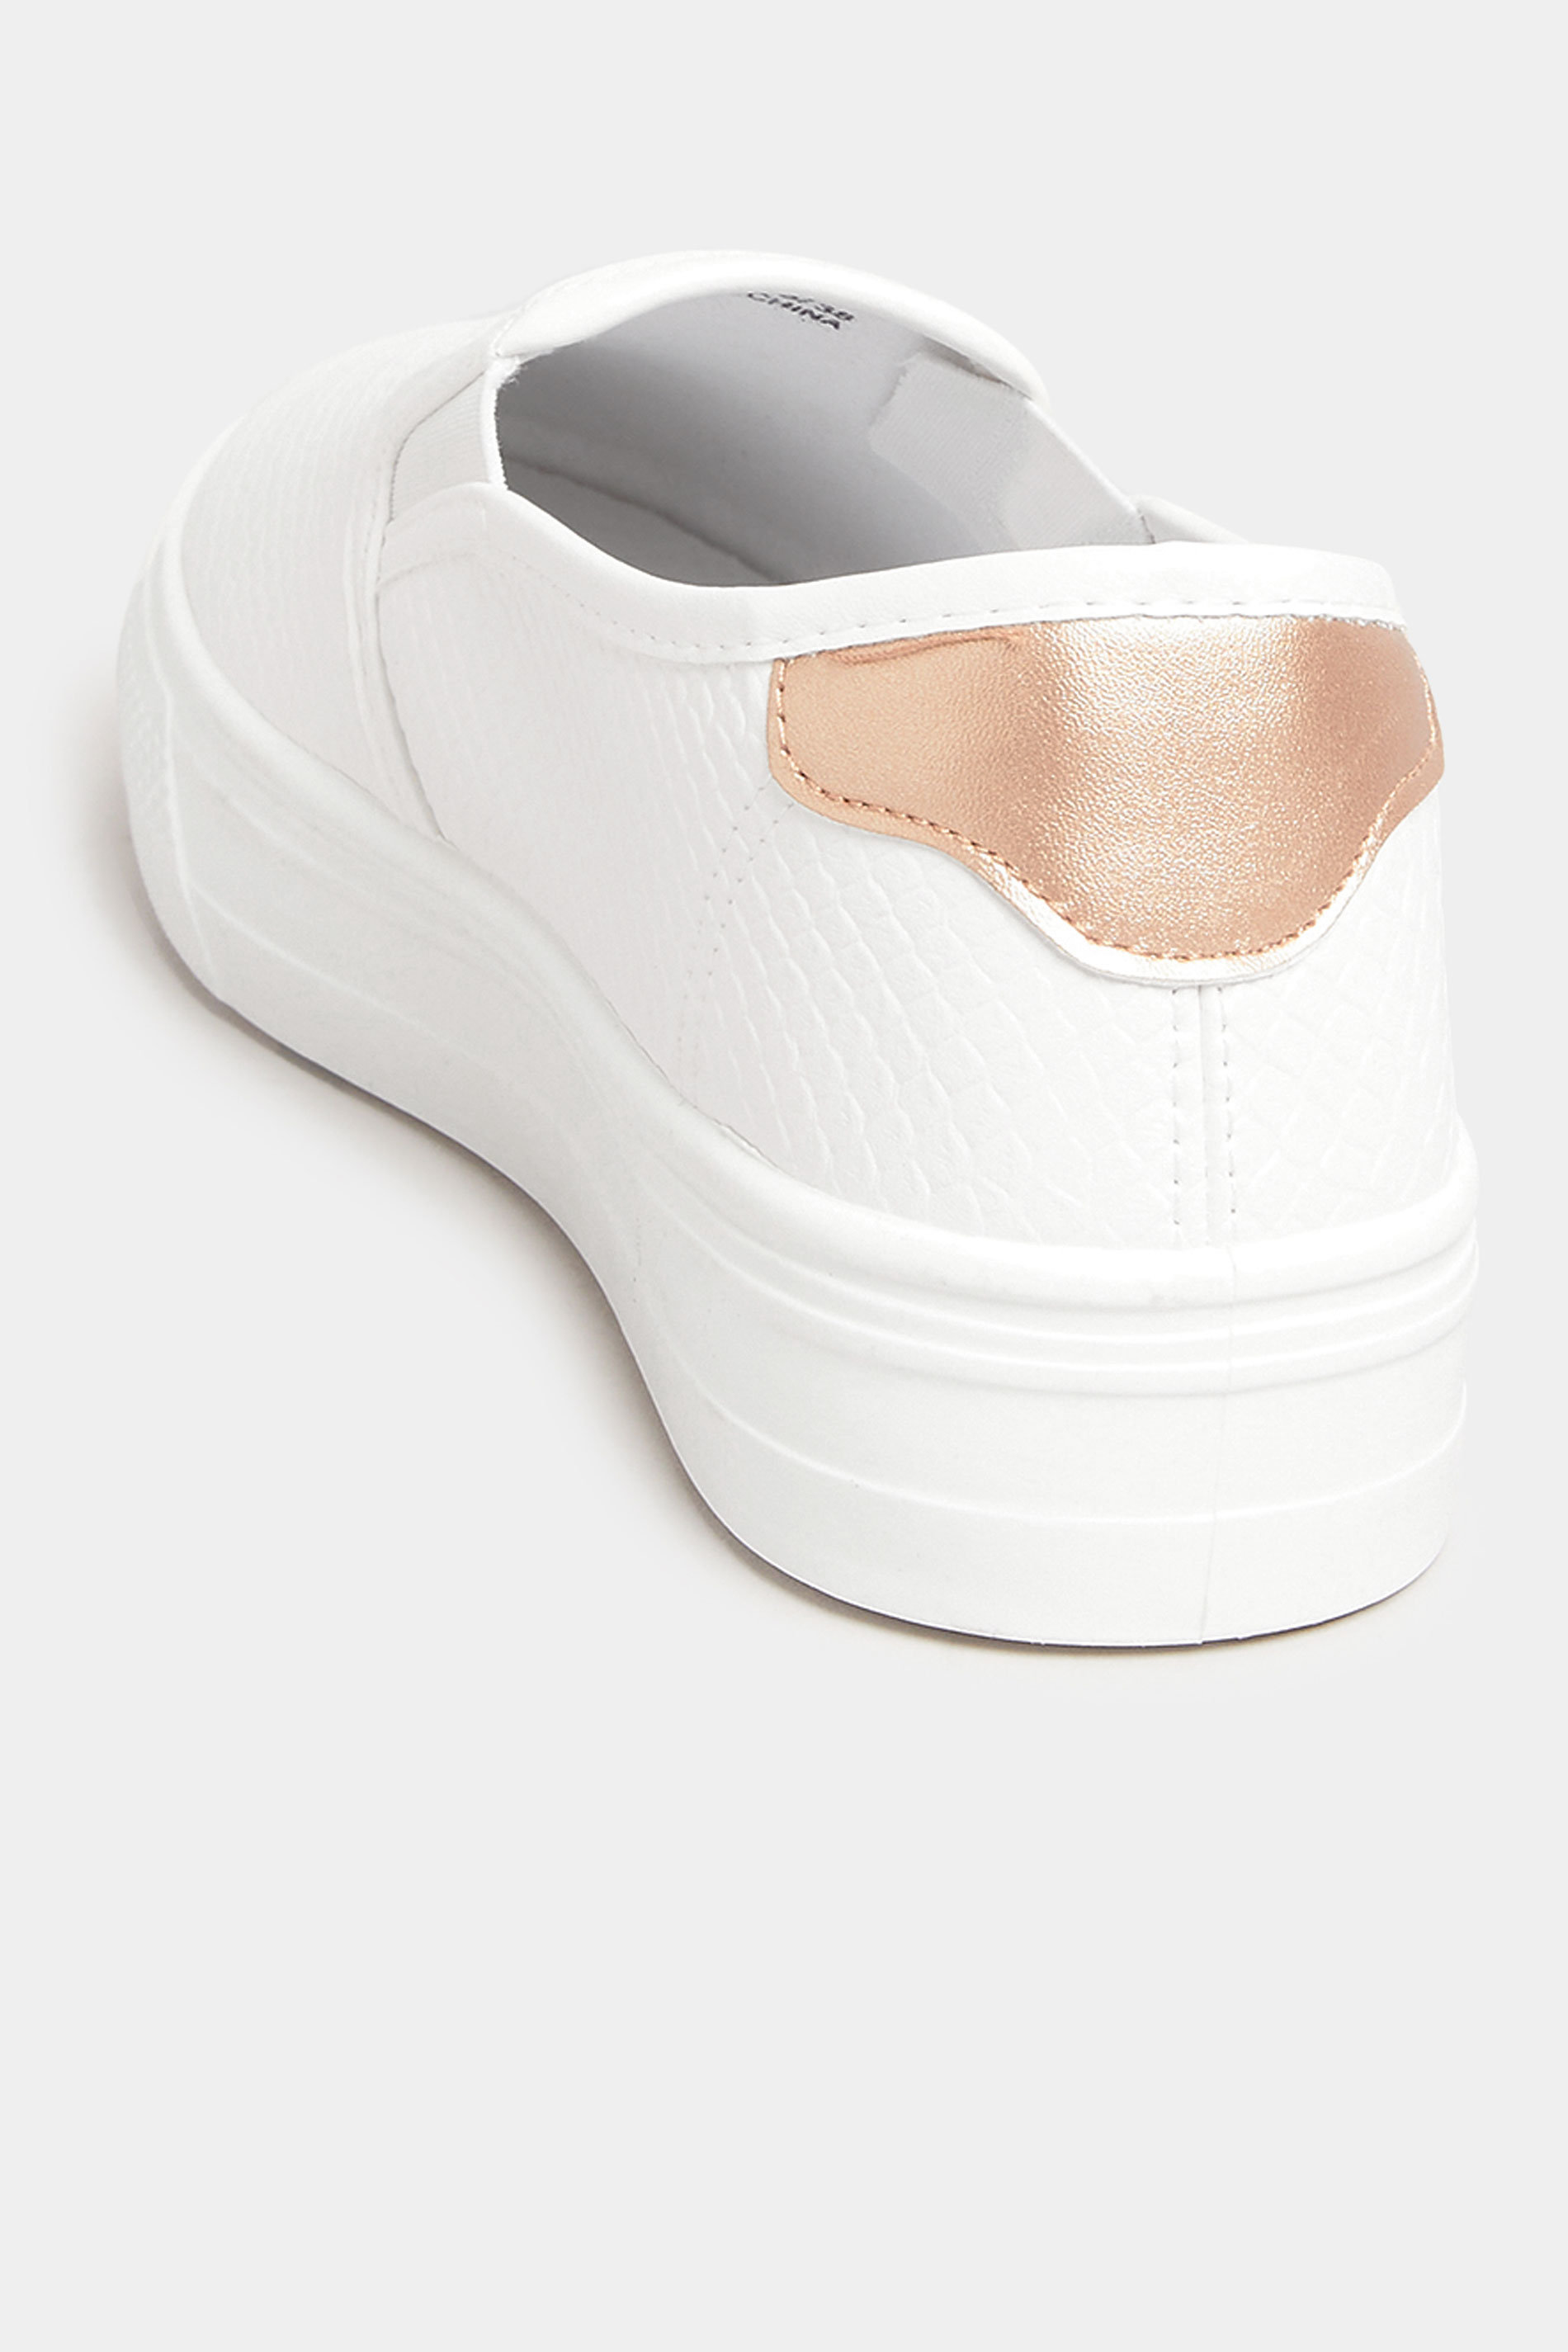 Grande taille  Shoes Grande taille  Flat Shoes | PixieGirl White Croc Flatform Slip On Trainers In Standard D Fit - TR40125